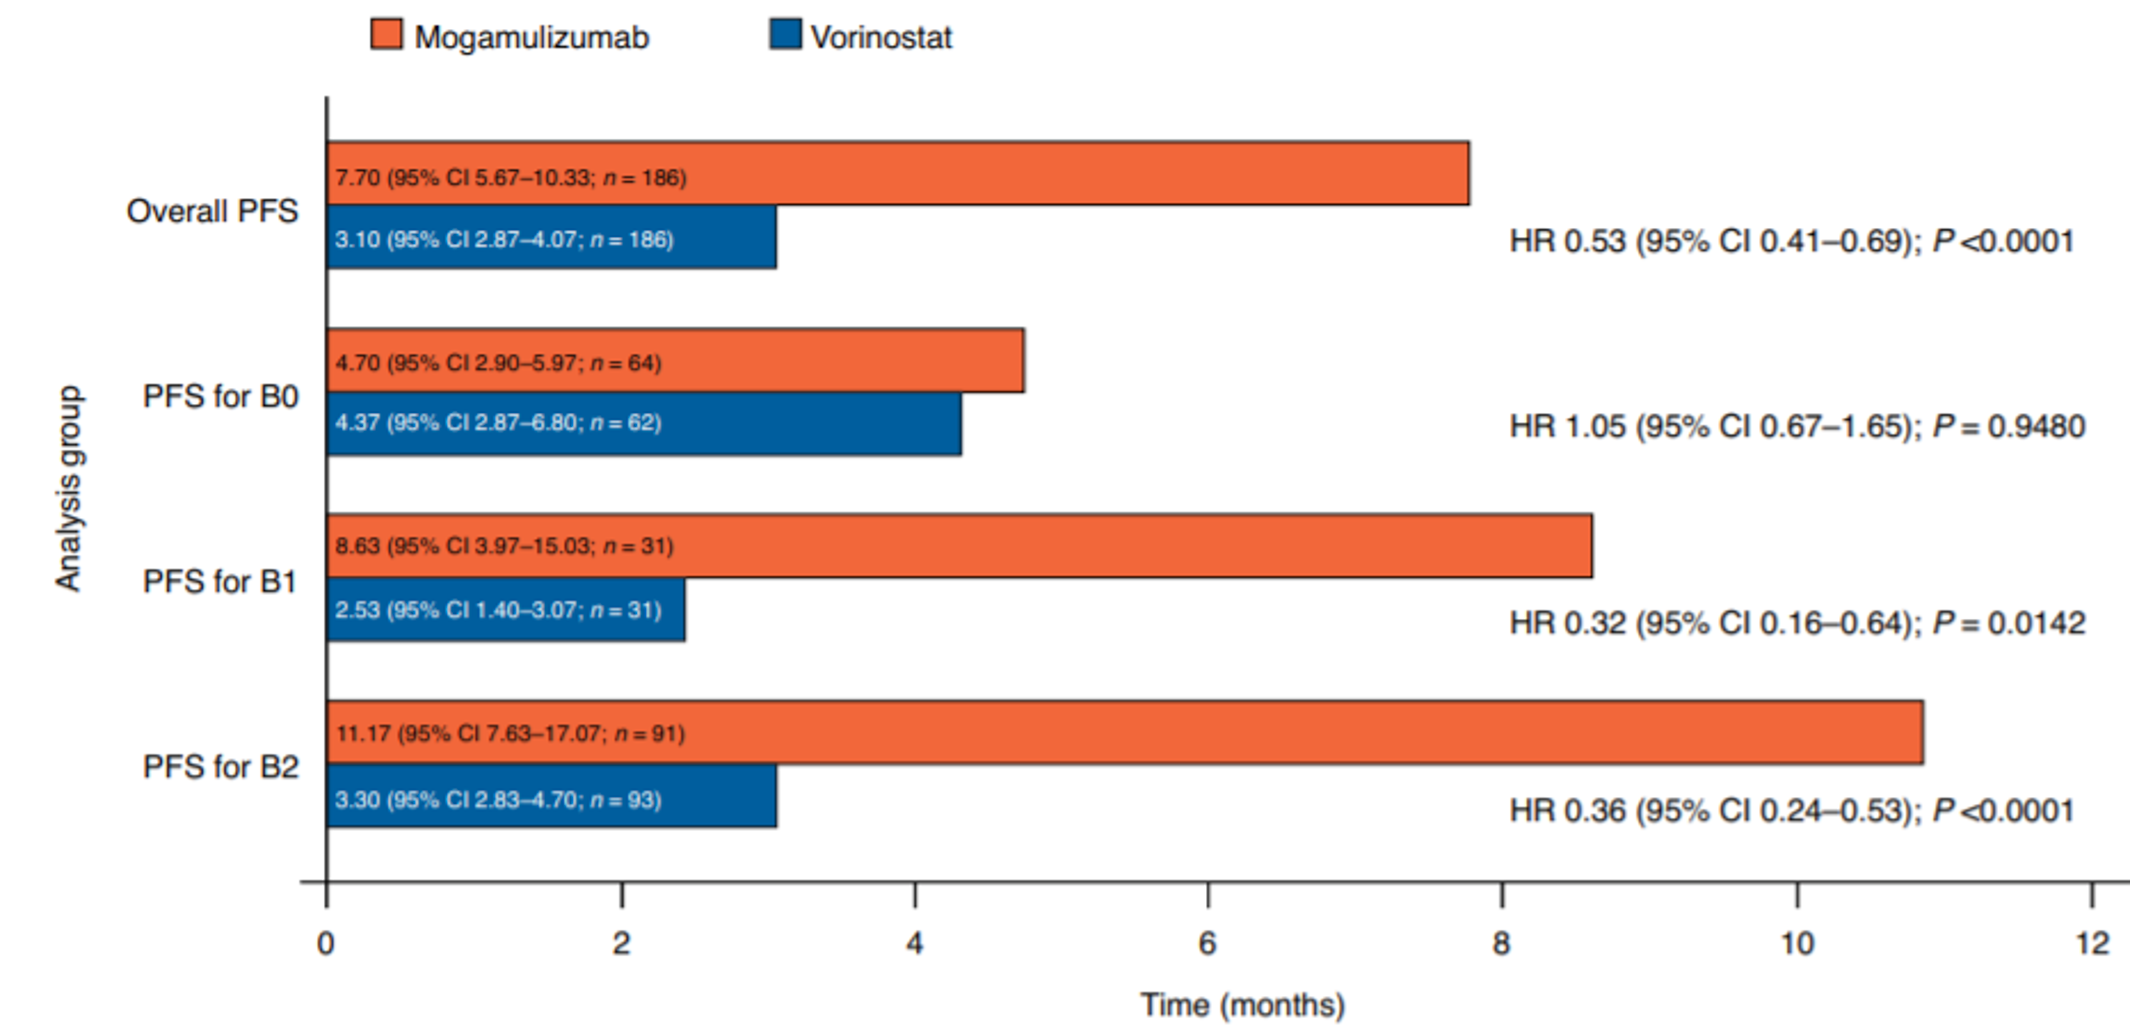 Progression-free survival results for mogamulizumab and vorinostat in patients with blood involvement. Mogamulizumab was favoured in patients with B1 and B2 disease with an HR of 0.32 (95% CI, 0.16 to 0.64) and 0.36 (95% CI, 0.24 to 0.53) respectively. Median PFS for mogamulizumab and vorinostat in patients with B1 and B2 disease were 8.63 months versus 2.53 months and 11.17 months versus 3.30 months.